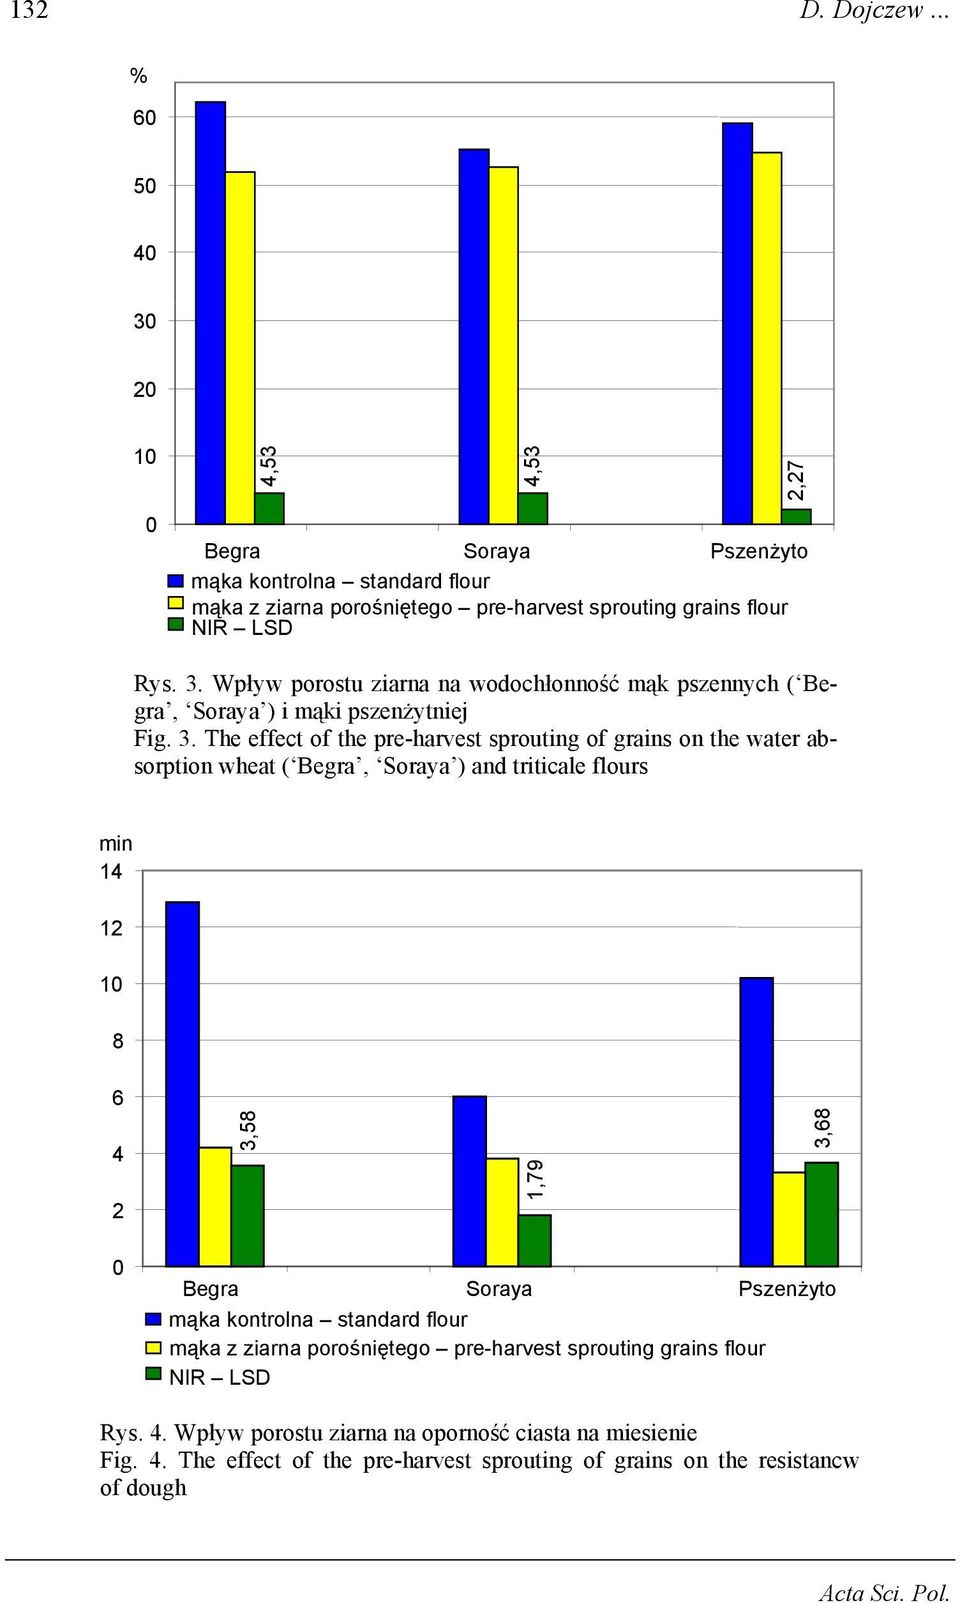 The effect of the pre-harvest sprouting of grains on the water absorption wheat ( Begra, Soraya ) and triticale flours min 14 12 10 8 6 4 2 3,58 1,79 3,68 0 Begra Soraya